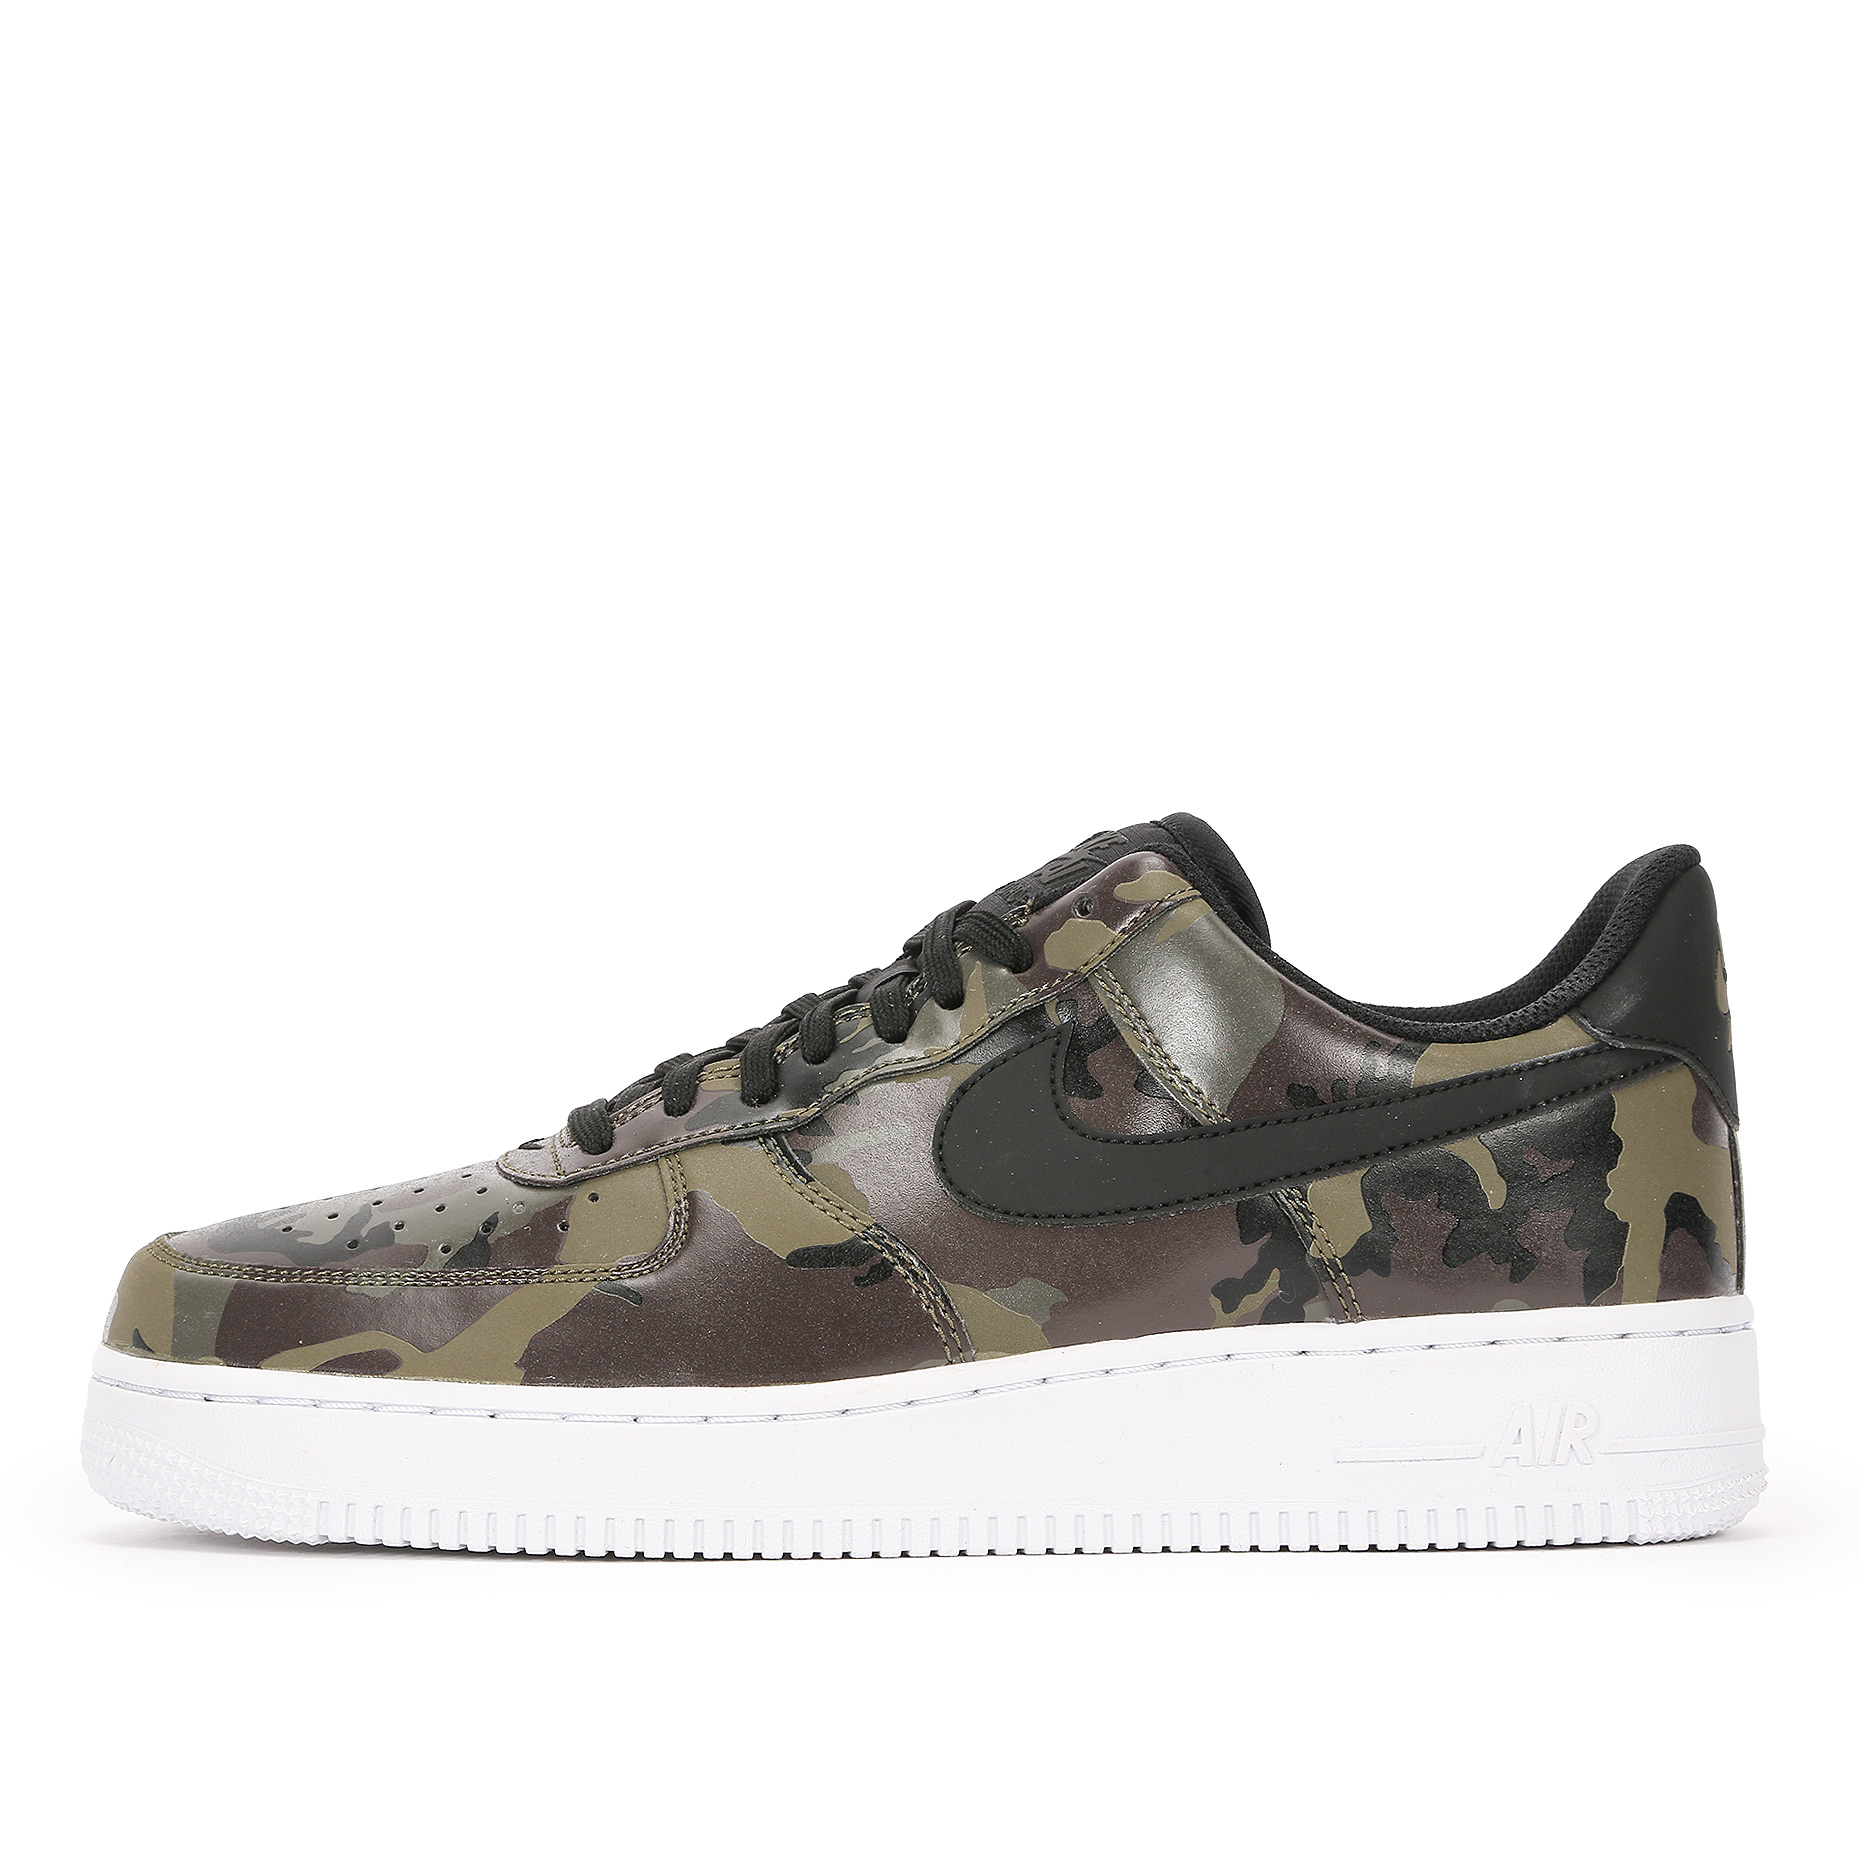 Nike AIR FORCE 1 '07 LV8 Camo Pack 